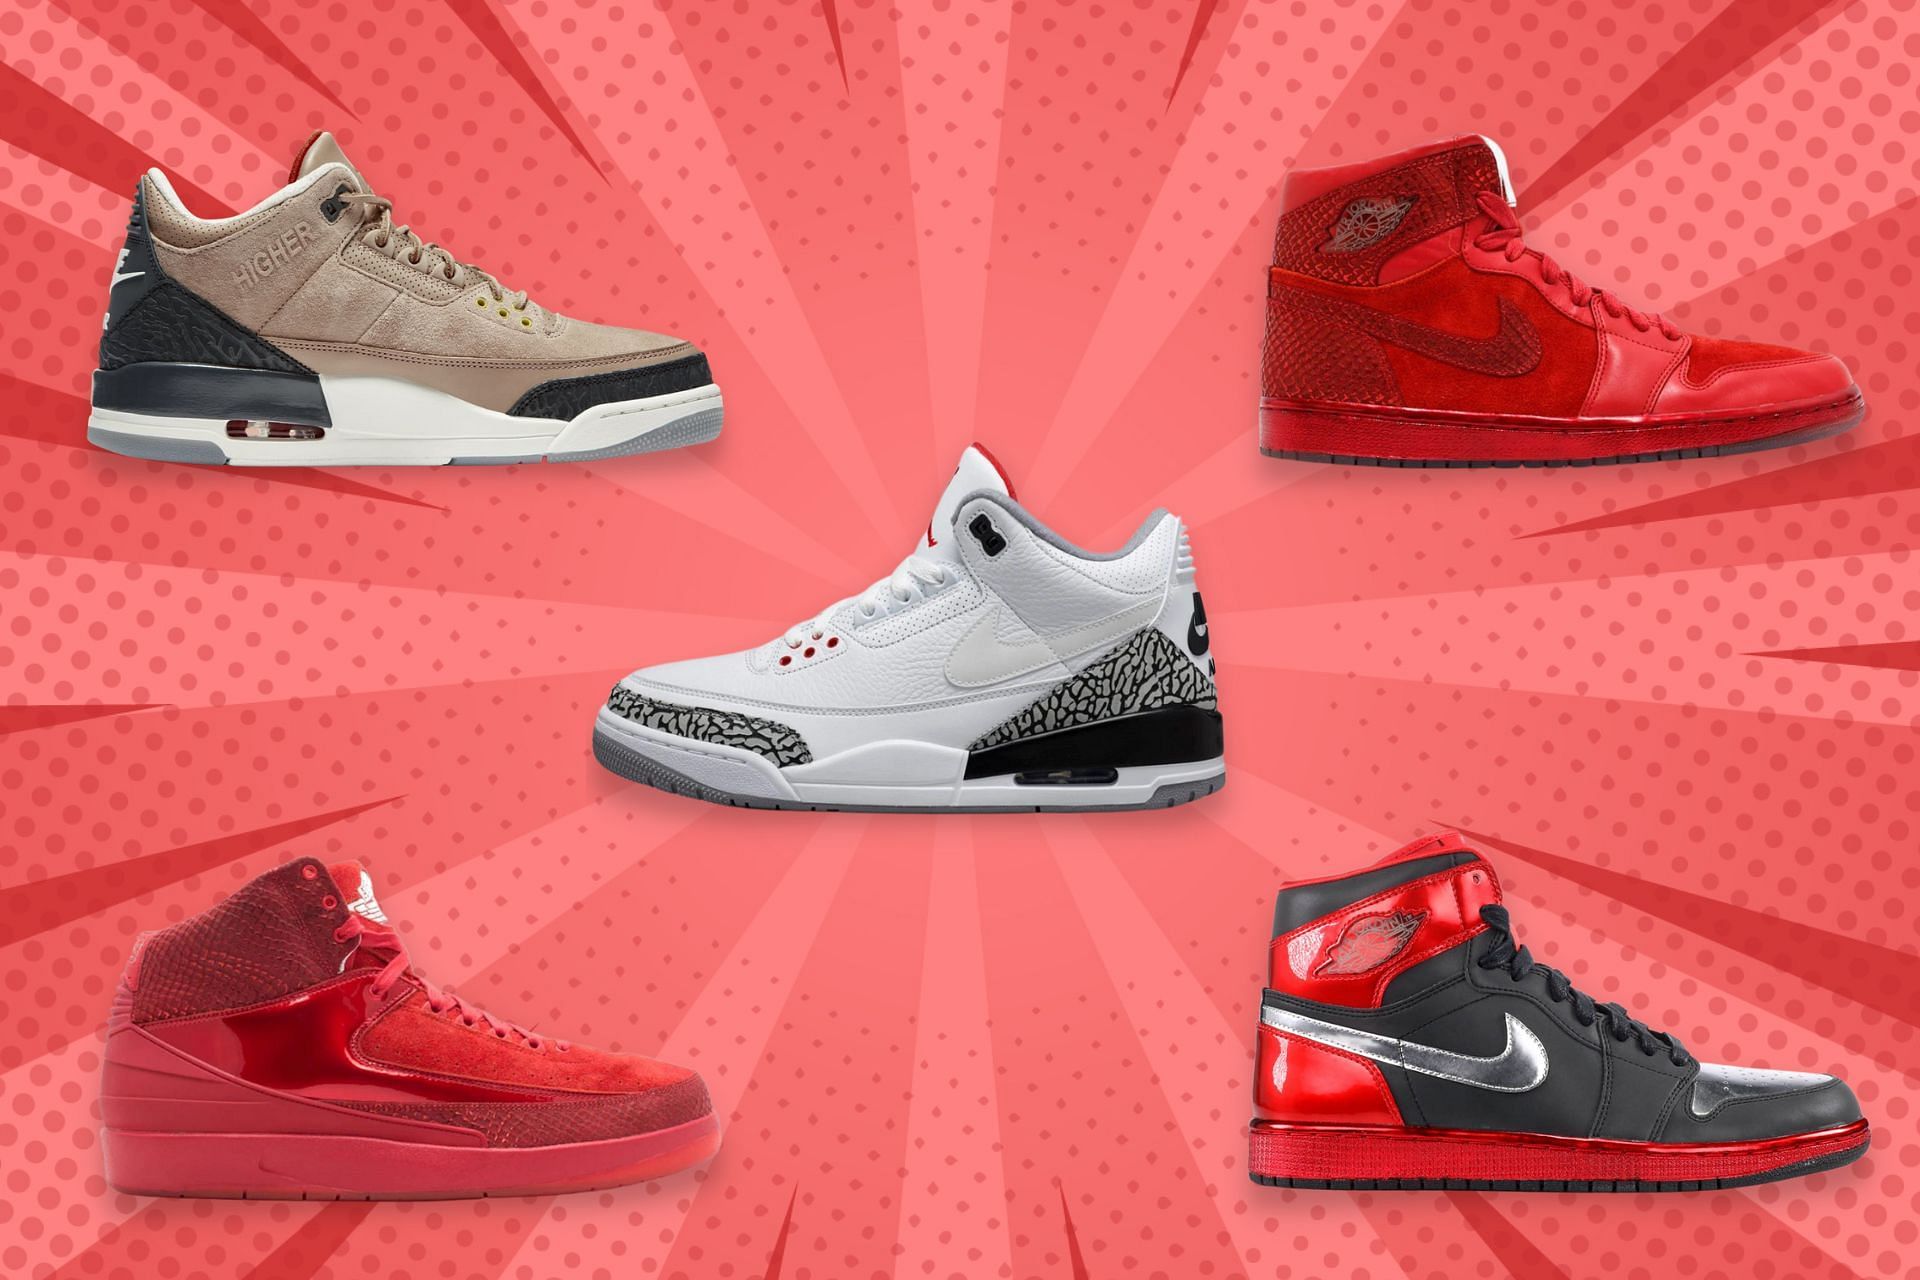 Justin Timberlake sneakers collection: 5 best shoes the pop icon owns (Image via Sportskeeda)